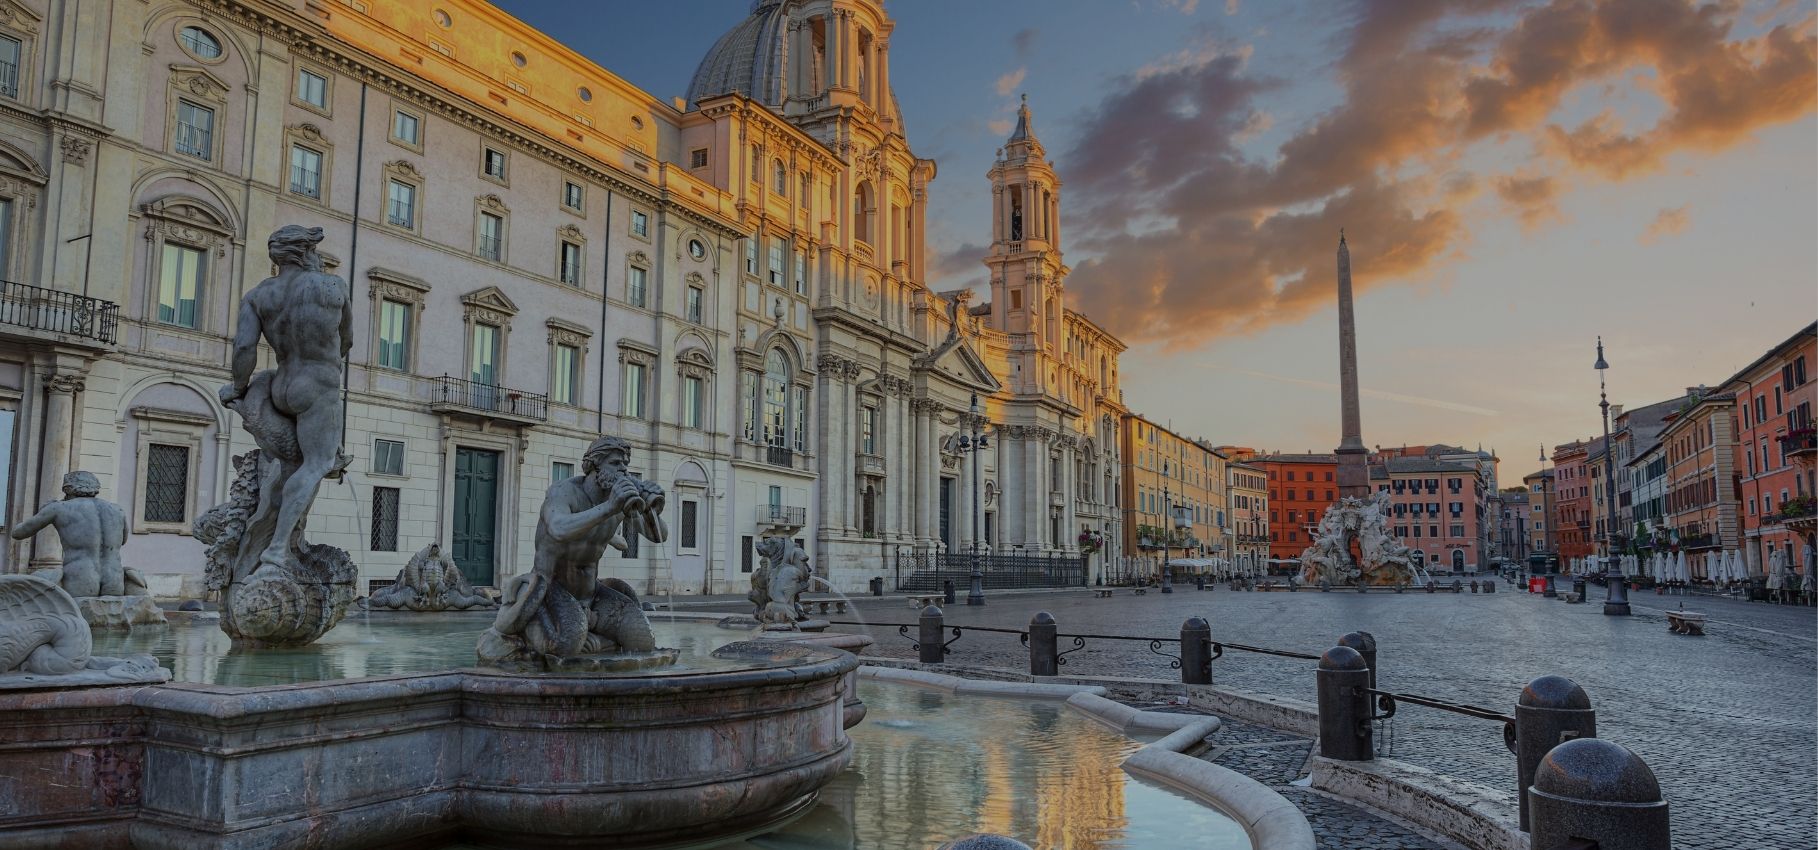 Top things to do in Rome, Italy